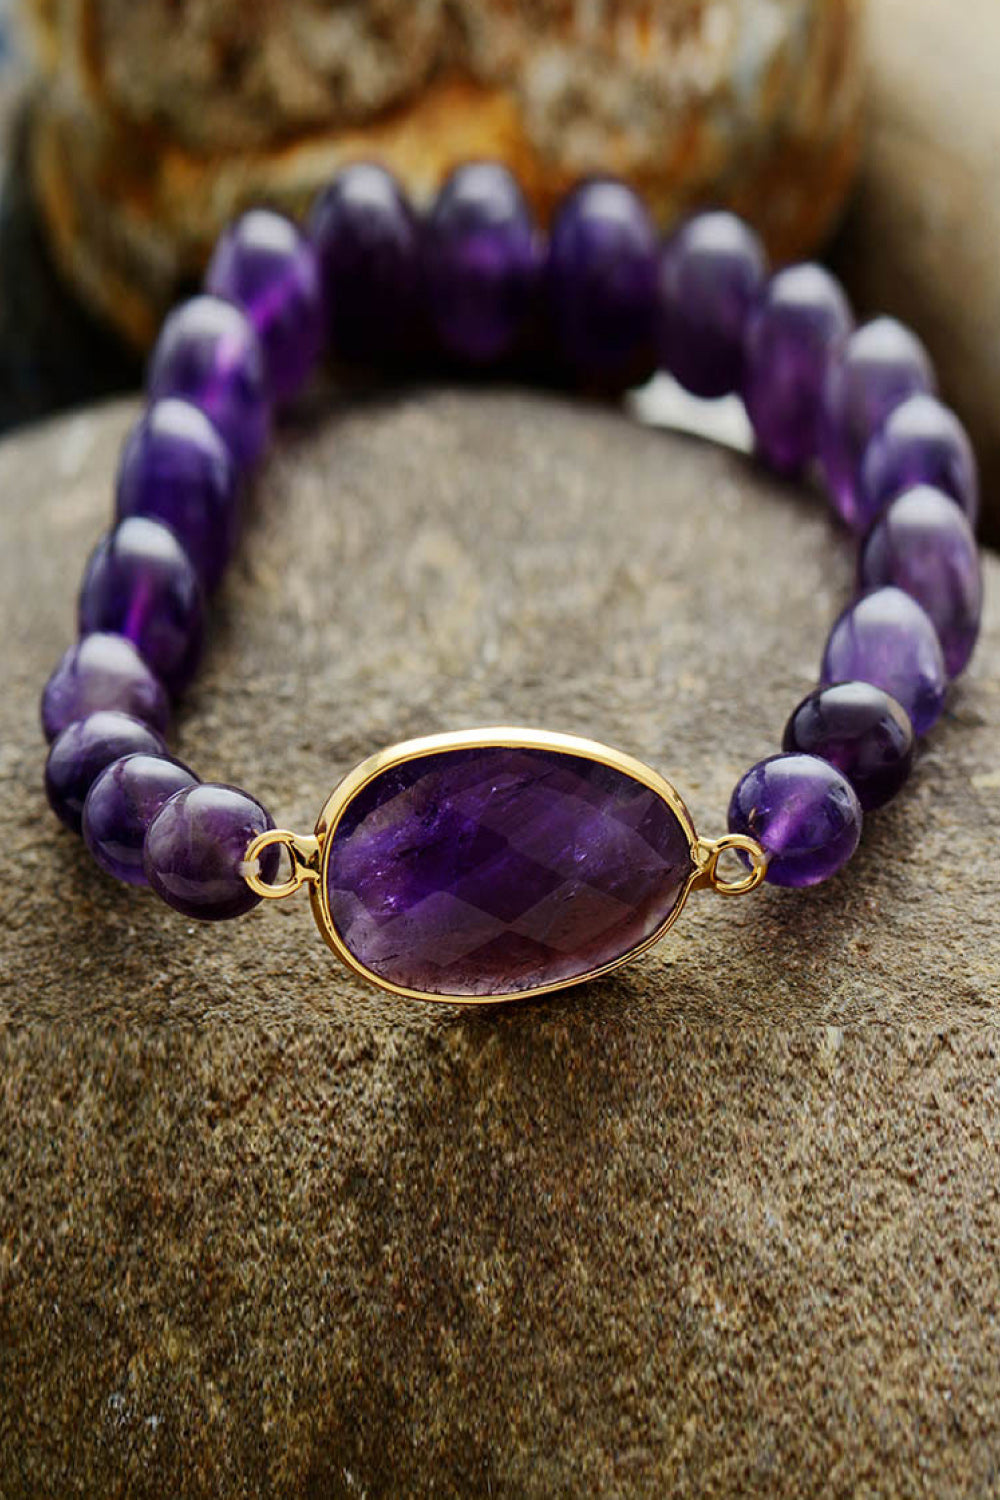 Handmade Amethyst Beaded Bracelet - Kawaii Stop - Amethyst Bracelet, Beaded Jewelry, Bracelet, Bracelets, Copper, Elegant, Handmade, Healing Crystal, Imported, L.Z., Meaningful, Modern Style, Ship From Overseas, Shipping Delay 09/29/2023 - 10/06/2023, Sophisticated, Women's Fashion